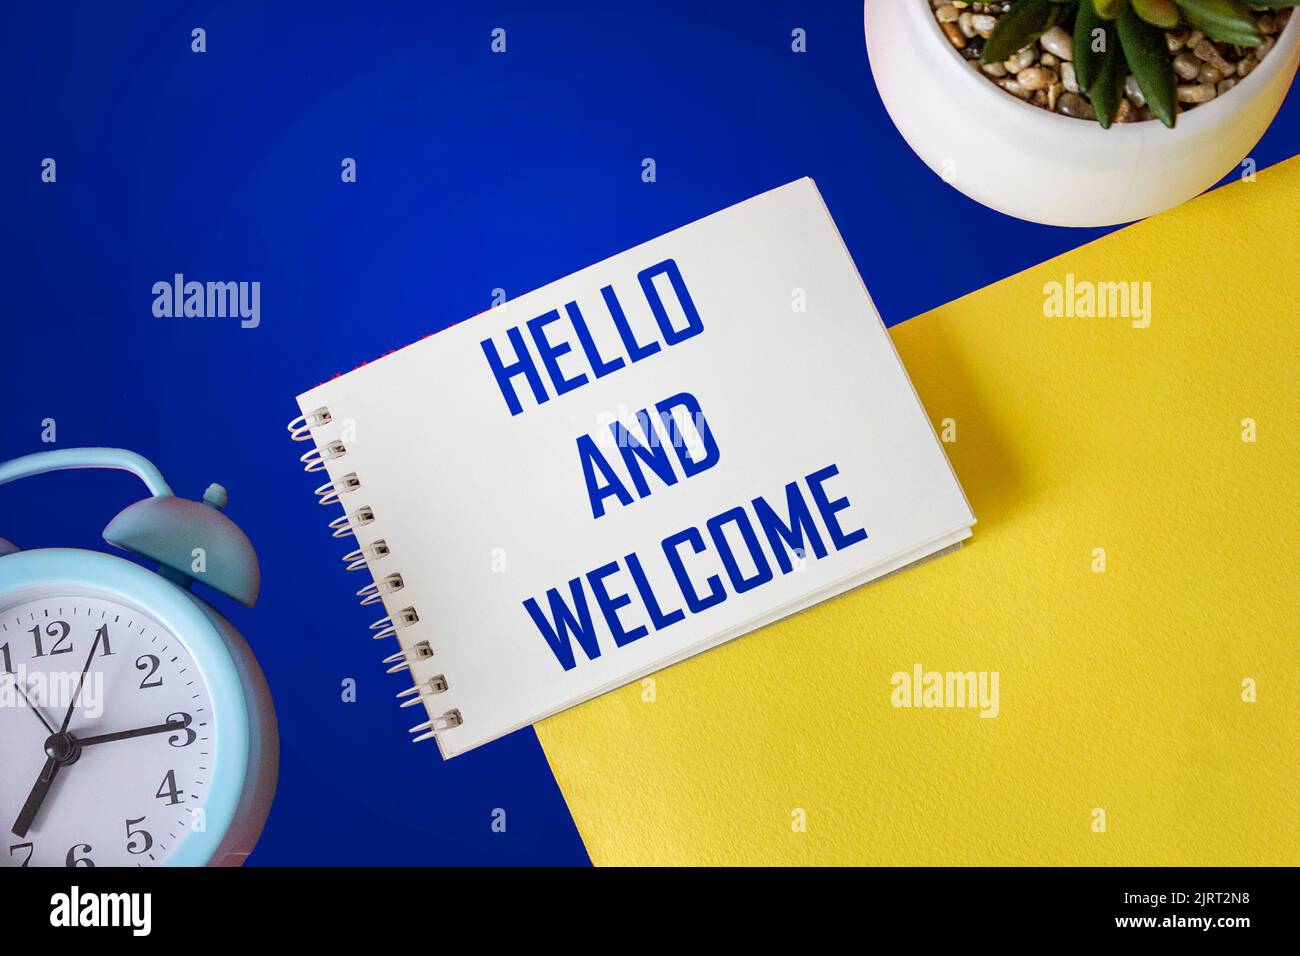 Hello and welcome symbol. Concept words Hello and welcome on notepad. Beautiful blue and yellow background. Blue alarm clock and cactus flower. Stock Photo